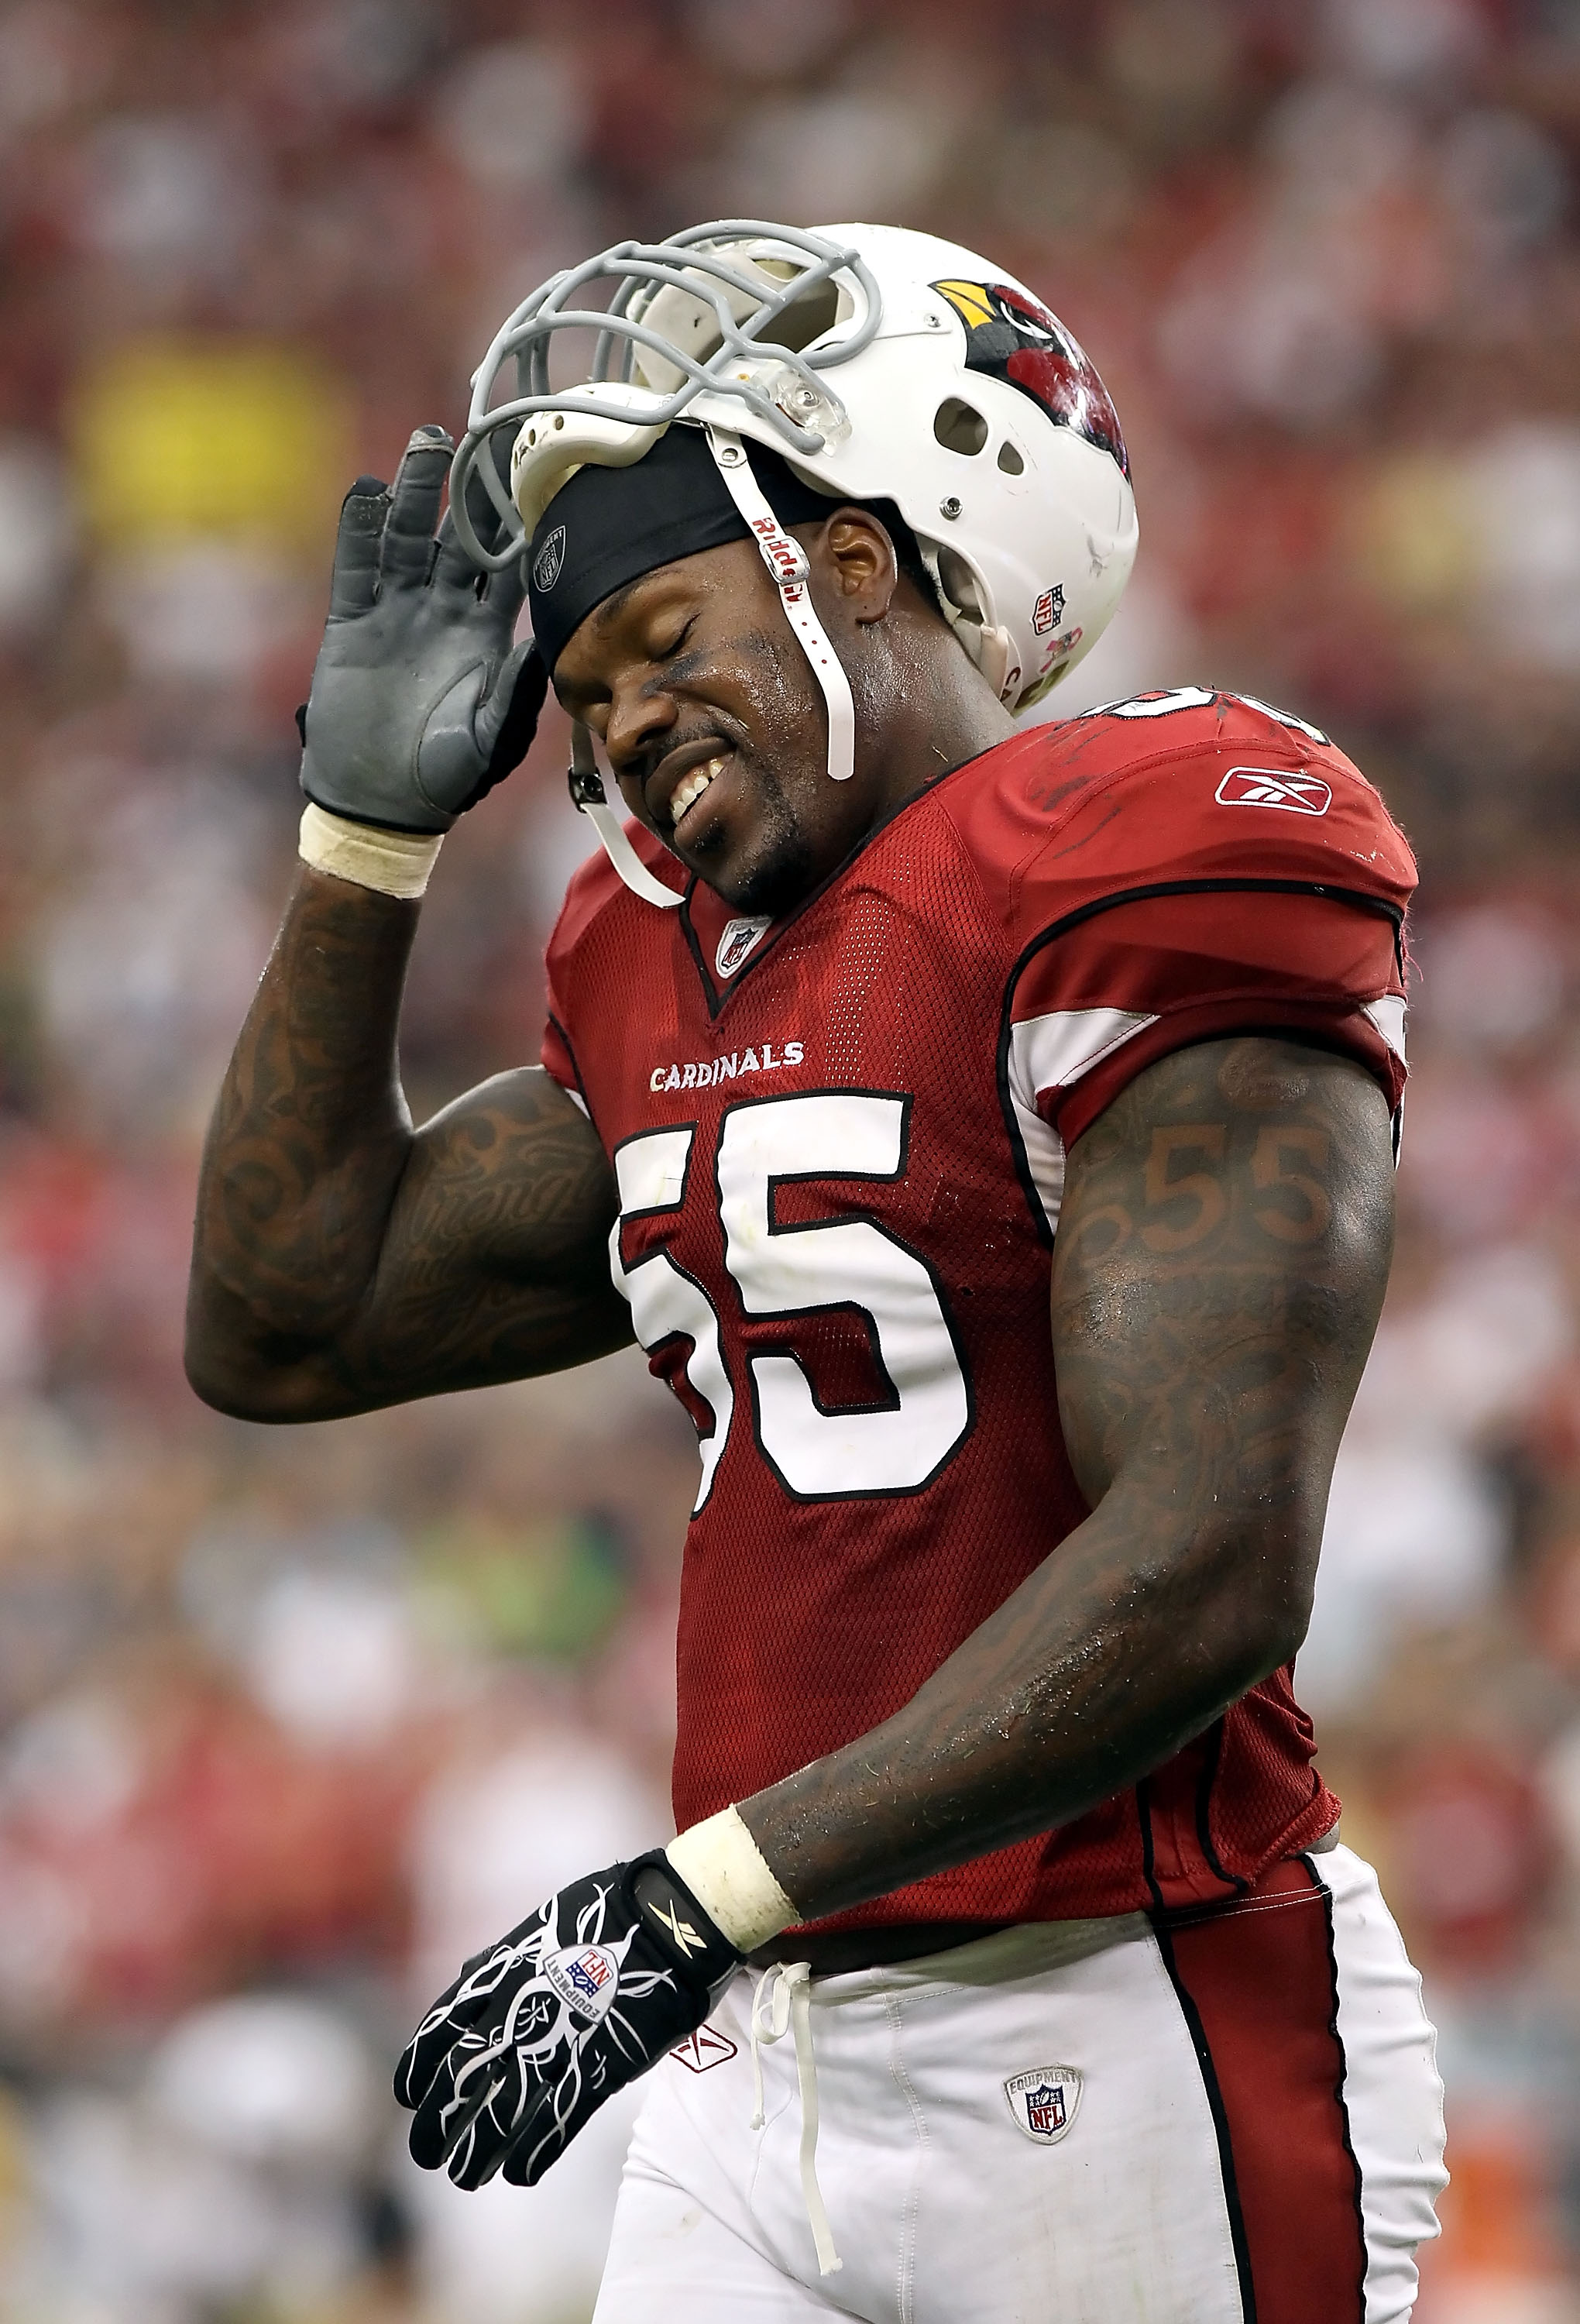 GLENDALE, AZ - OCTOBER 10:  Linebacker Joey Porter #55 of the Arizona Cardinals during the NFL game against the New Orleans Saints at the University of Phoenix Stadium on October 10, 2010 in Glendale, Arizona. The Cardinals defeated the Saints 30-20.  (Ph